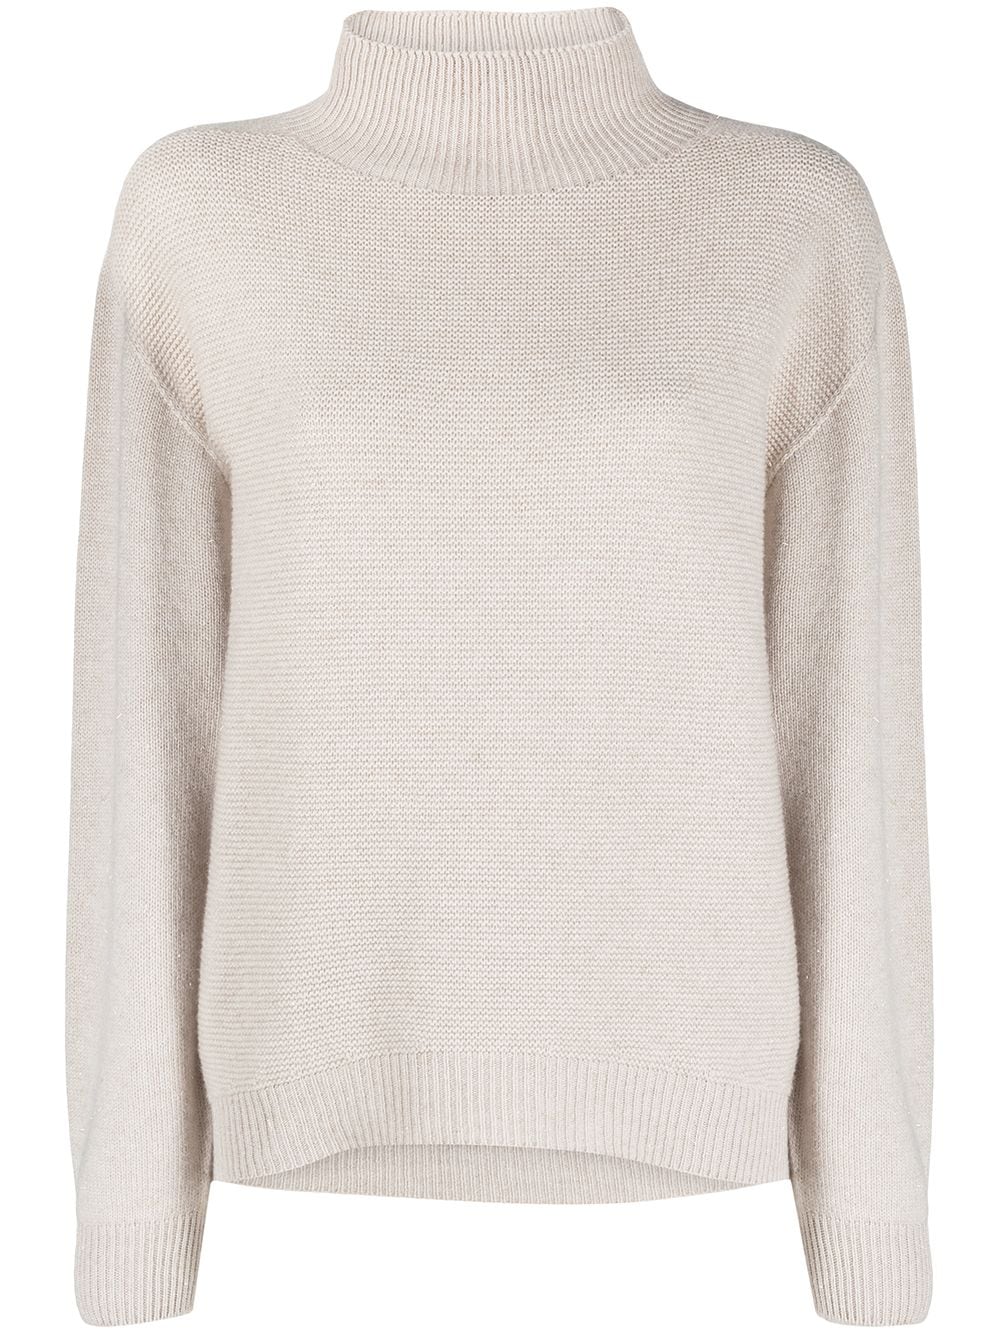 Shop Peserico knitted virgin wool-blend jumper with Express Delivery ...